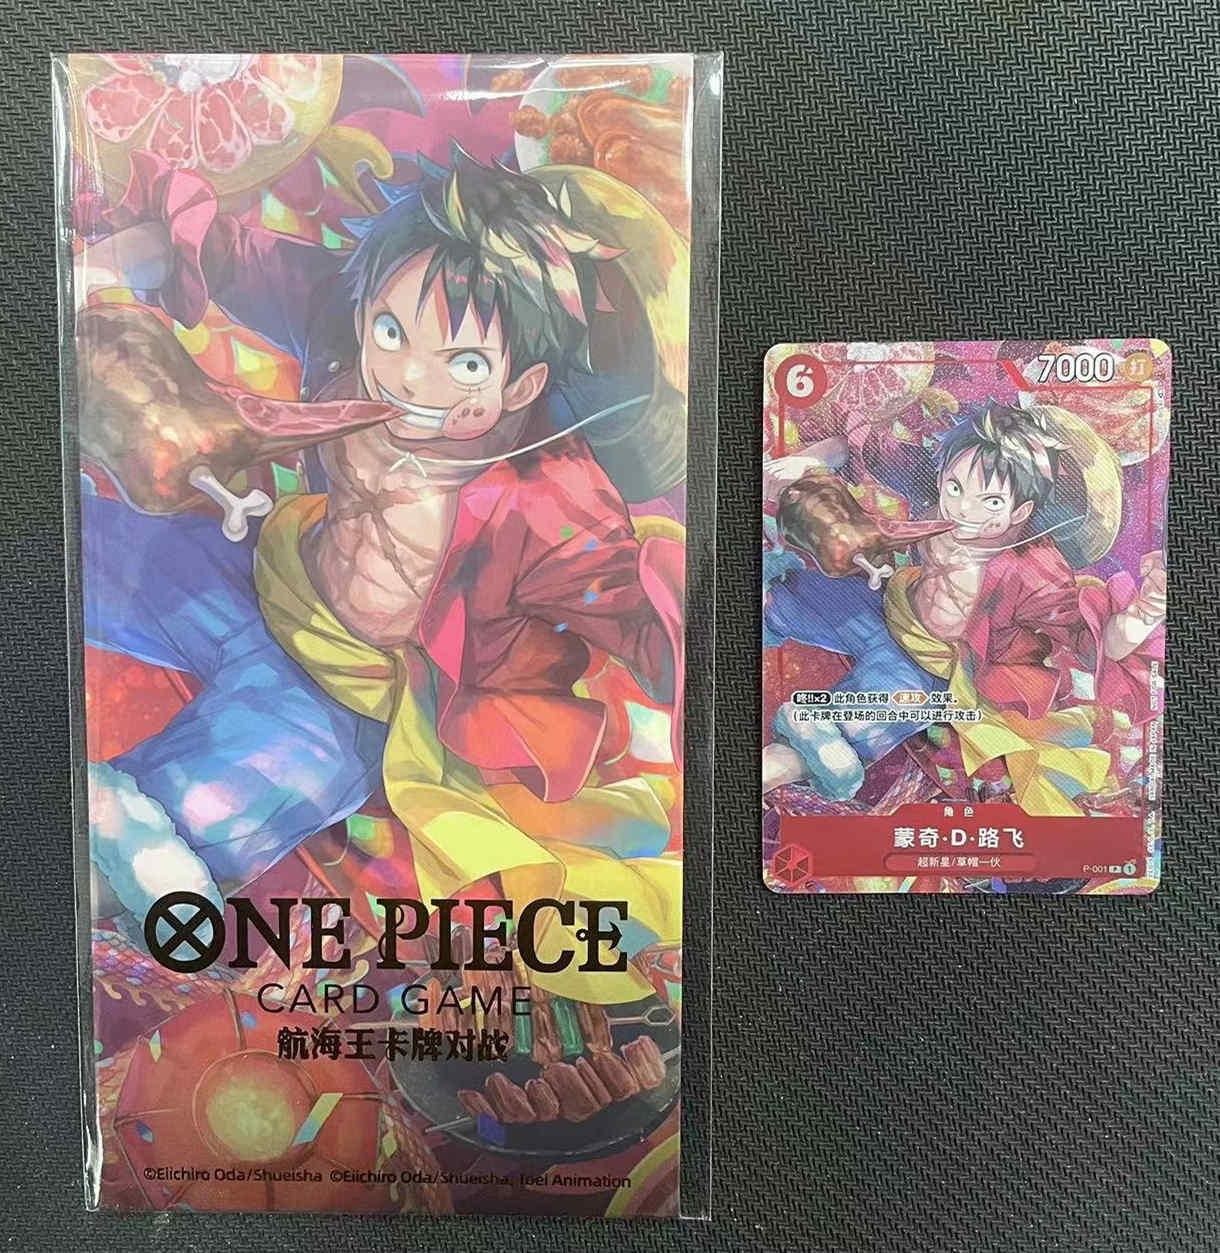 ONE PIECE Card Game Chinese New Year Red Packet Monkey D Luffy P-001 RARE PROMO